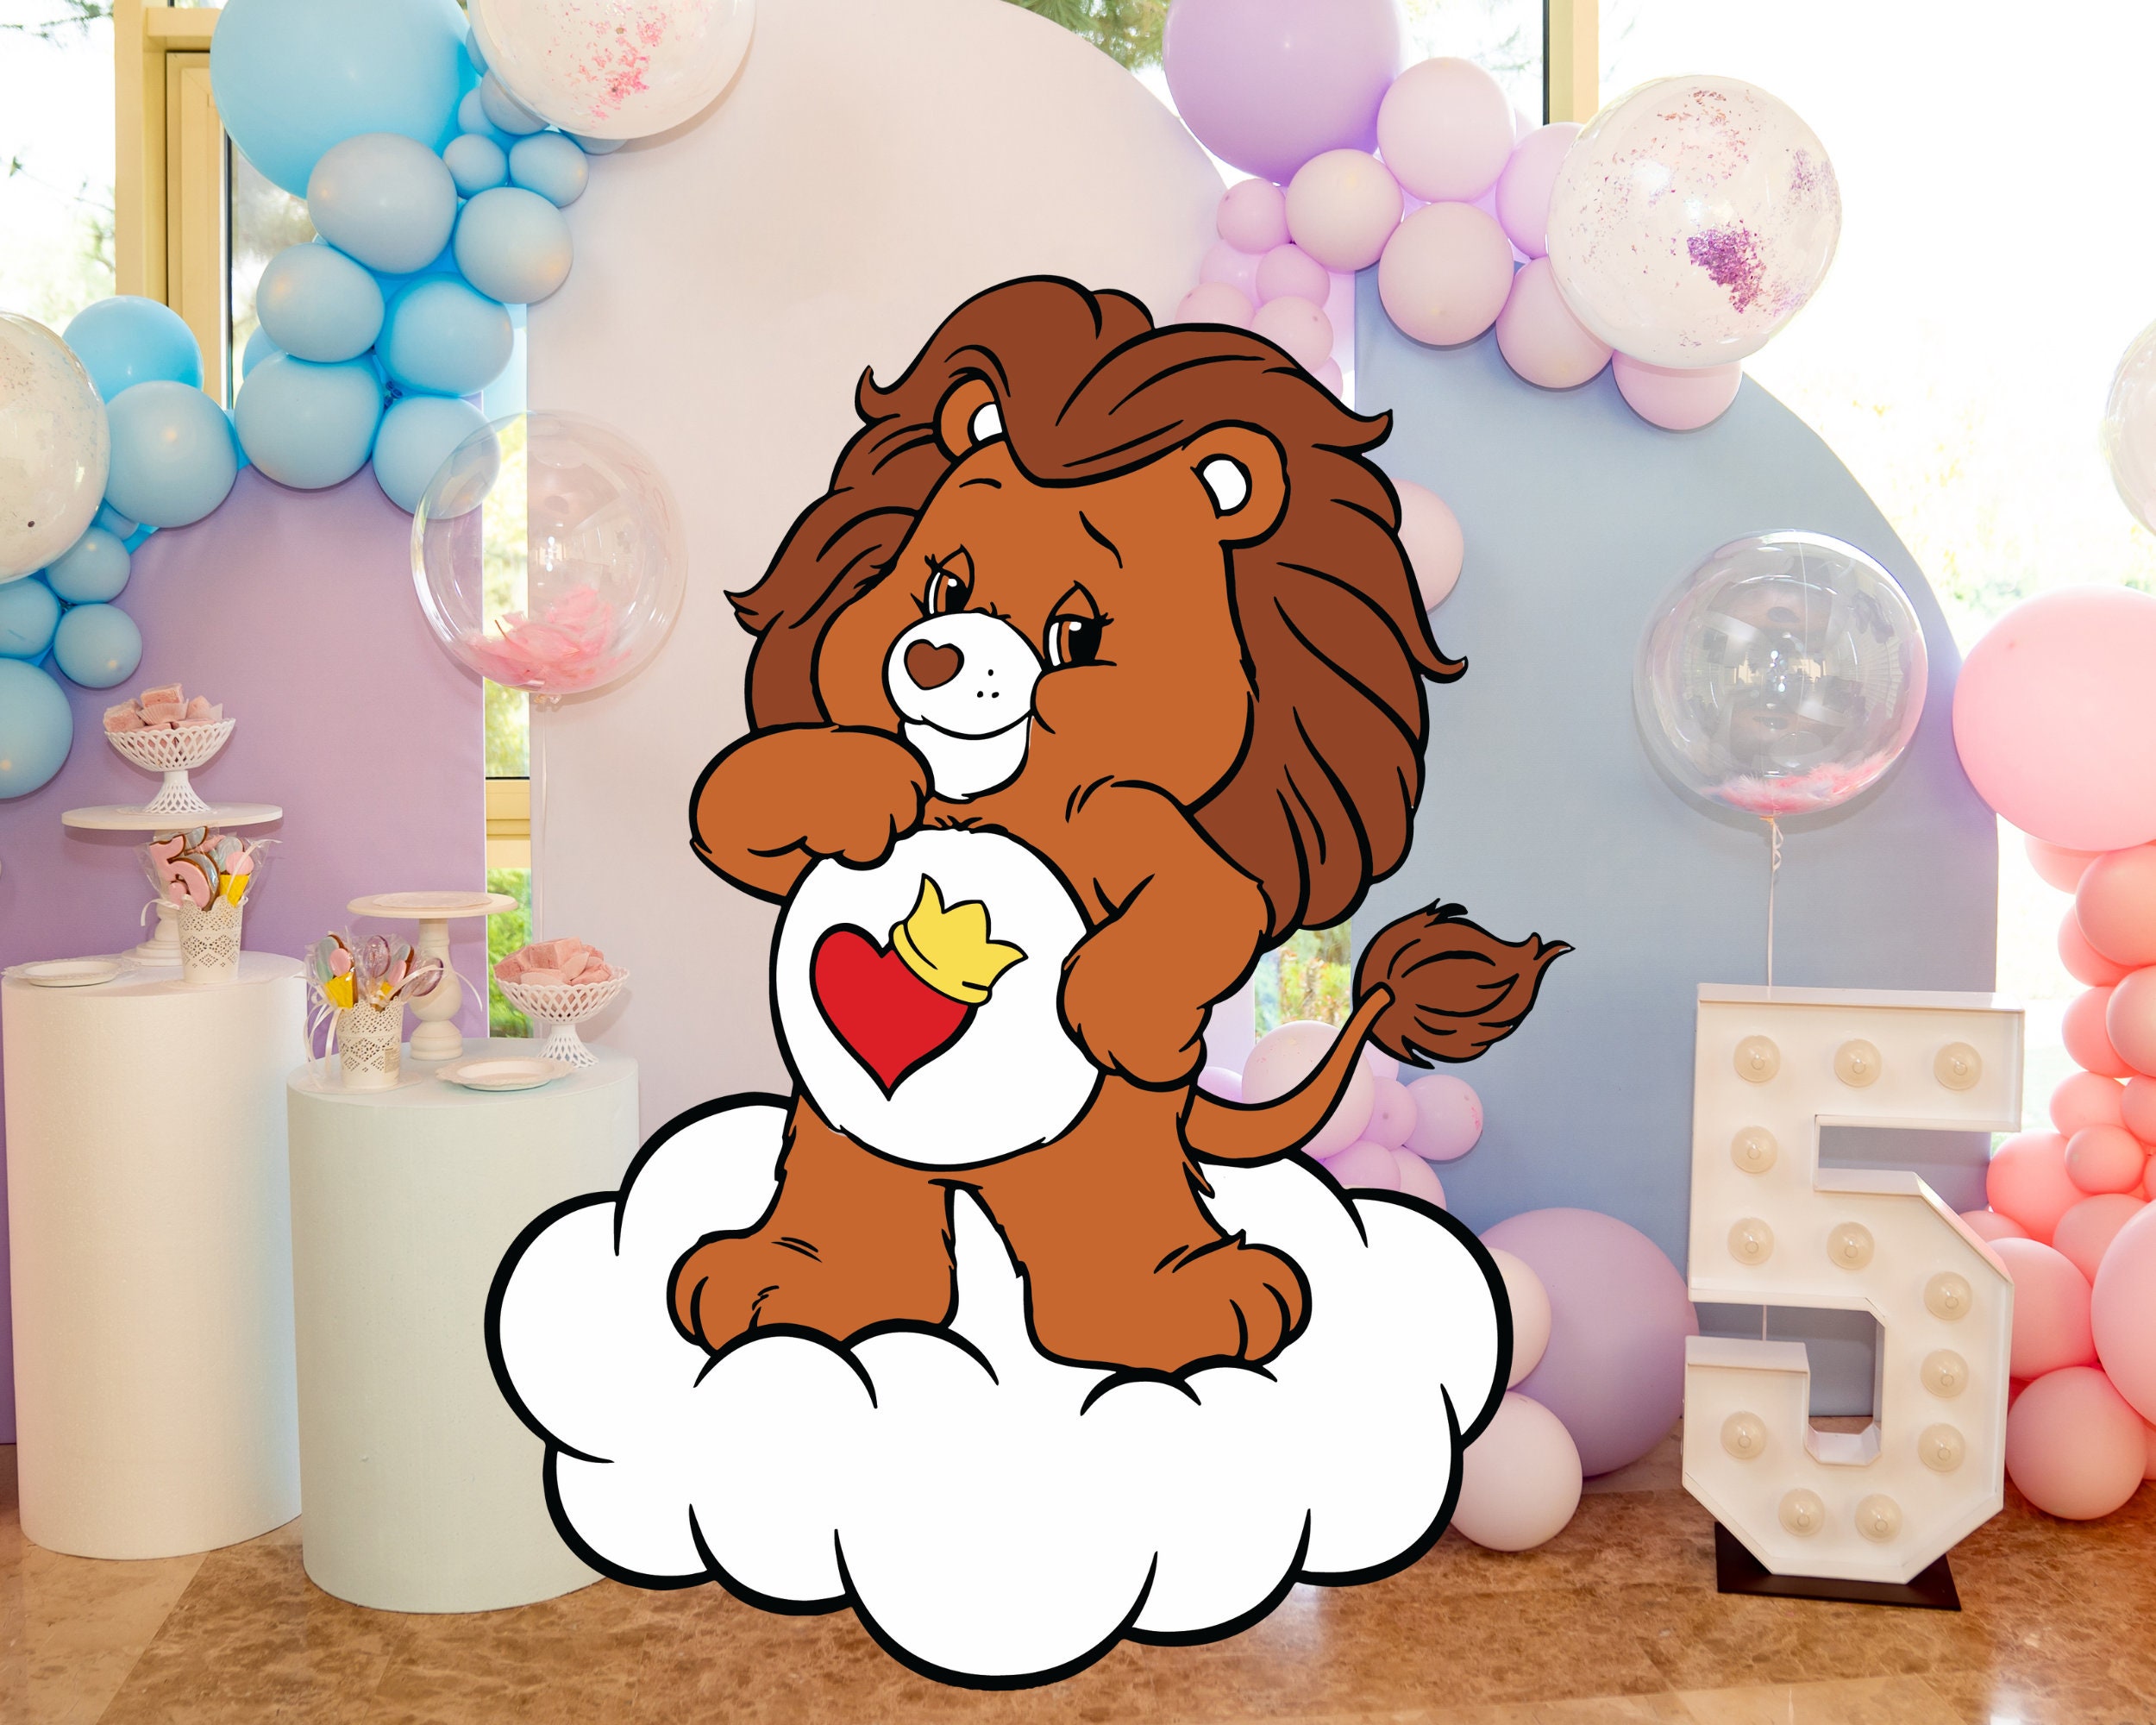 Care Bear Birthday or Baby Shower Theme Centerpiece Classic Colors  Decoration SET OF 7